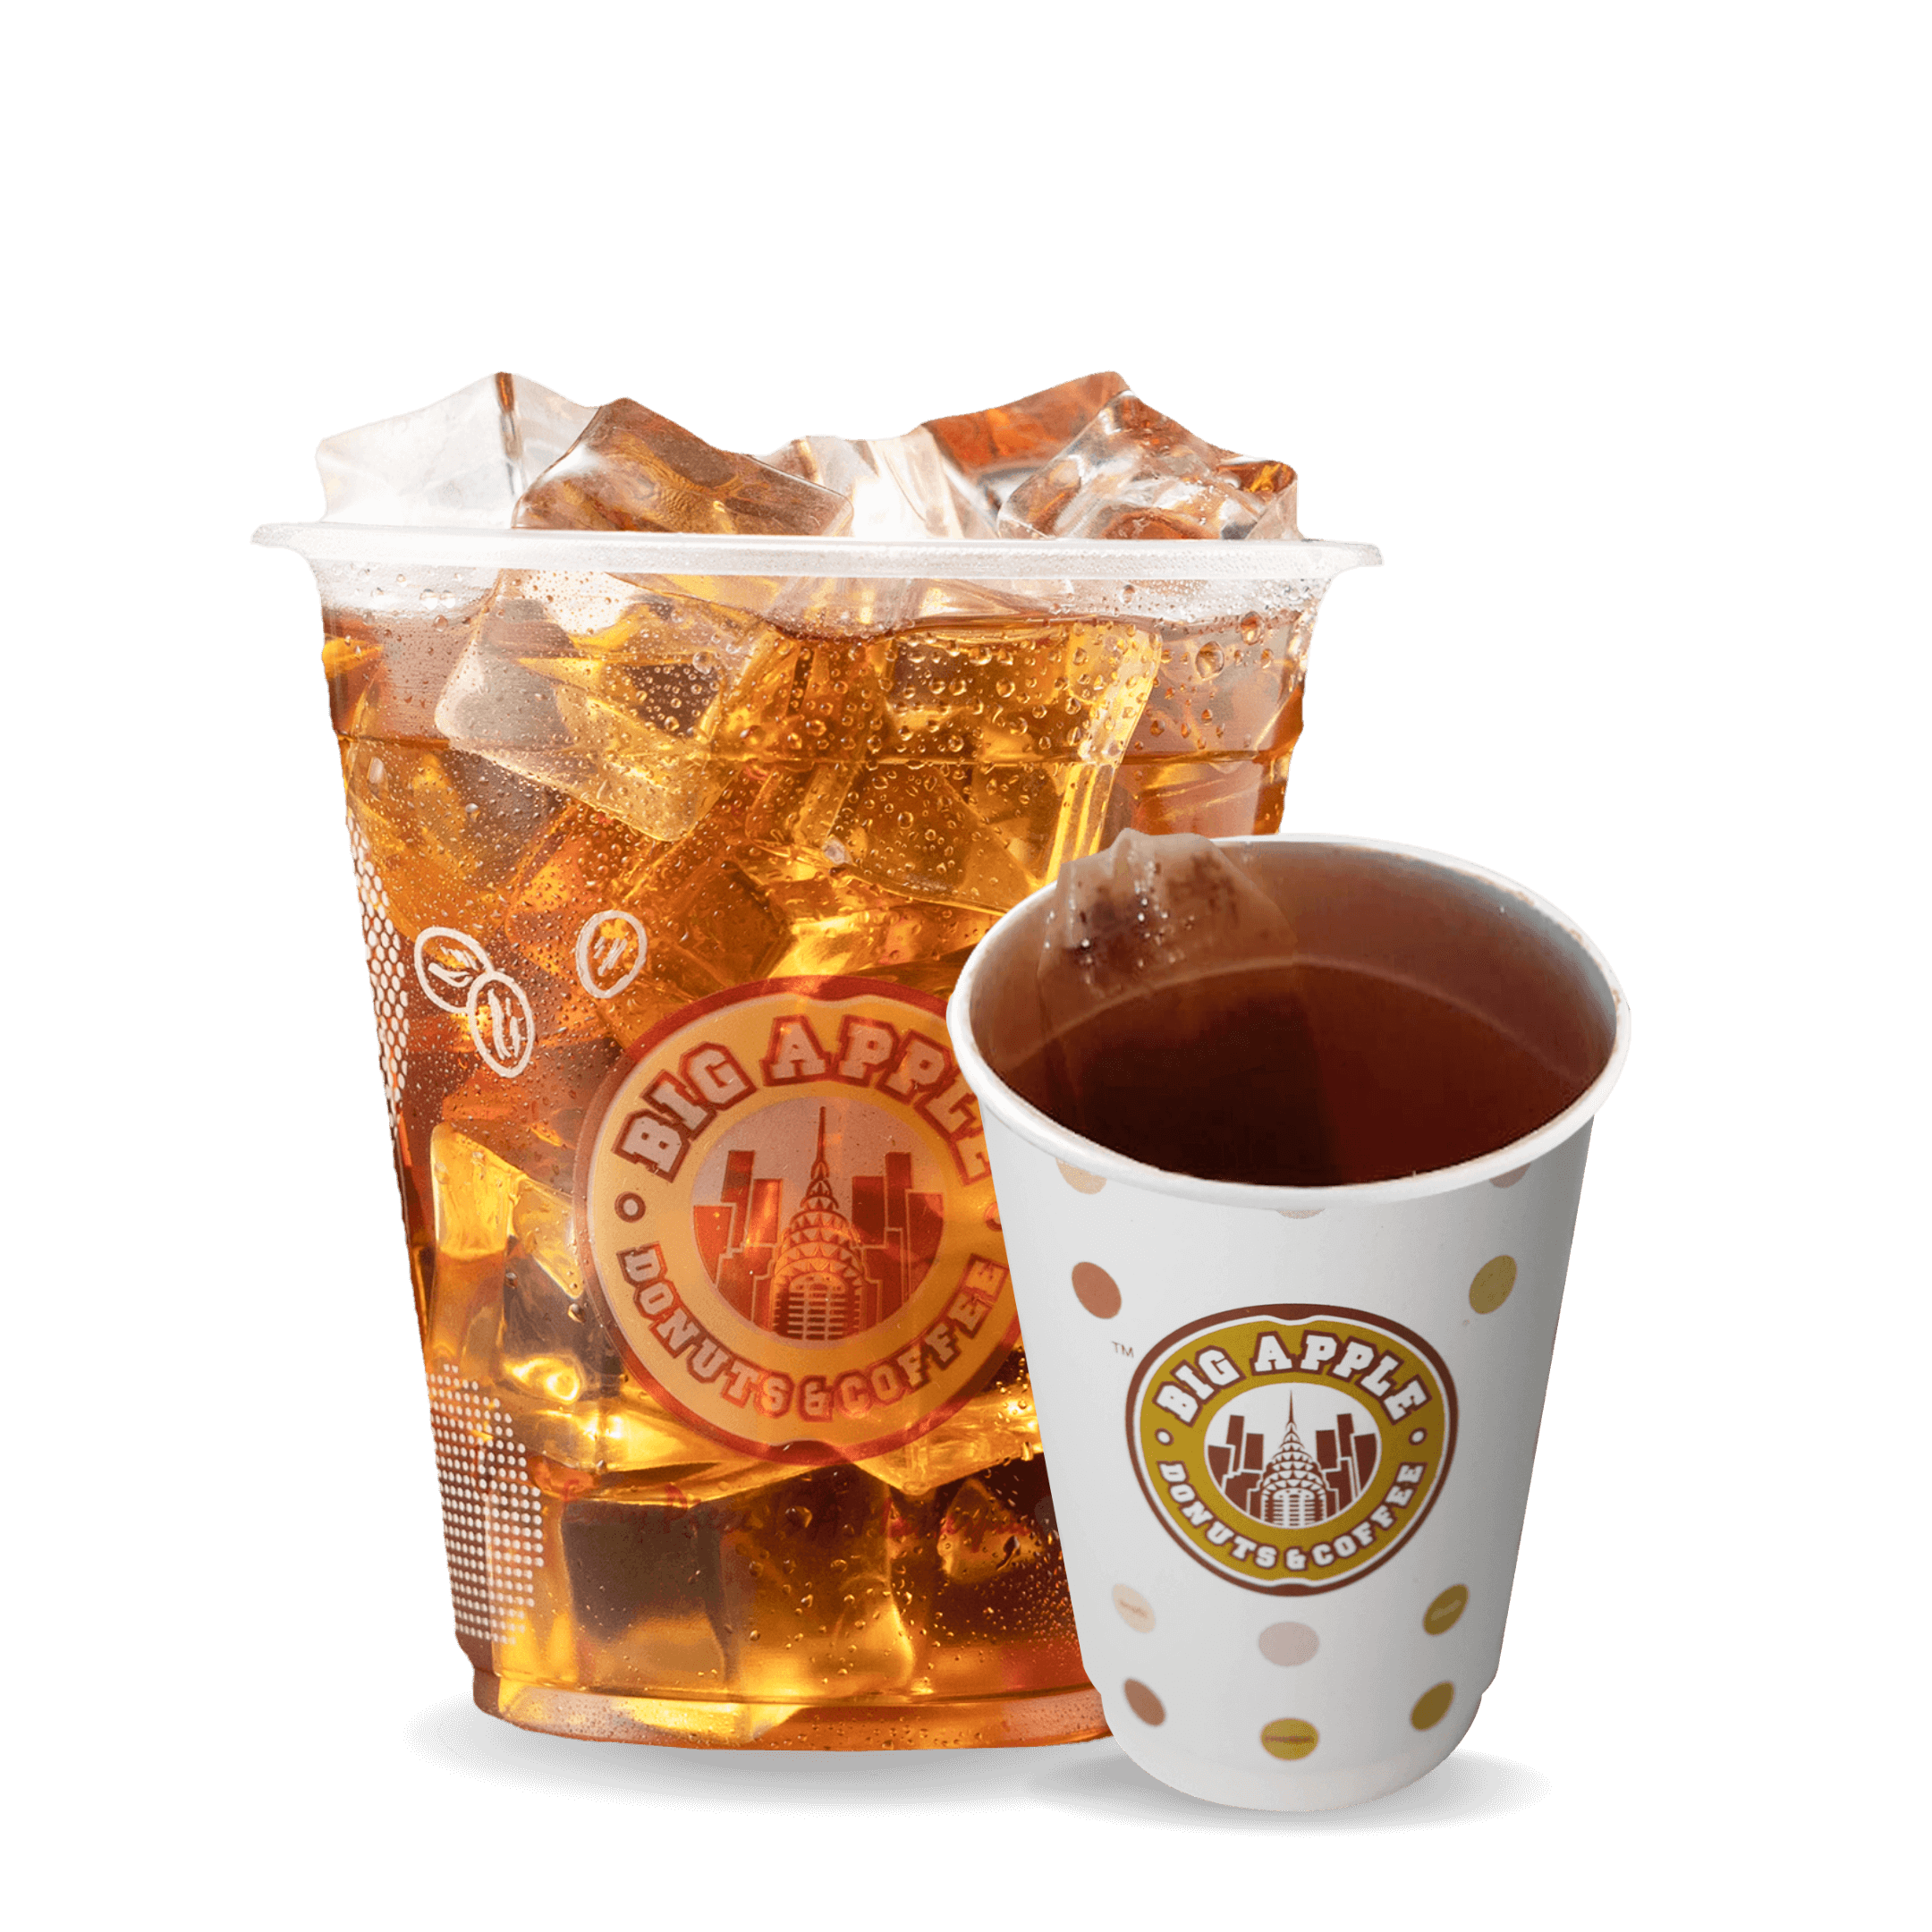 Big Apple Donuts & Coffee's New Beverages, Passion Tea Cold & Hot